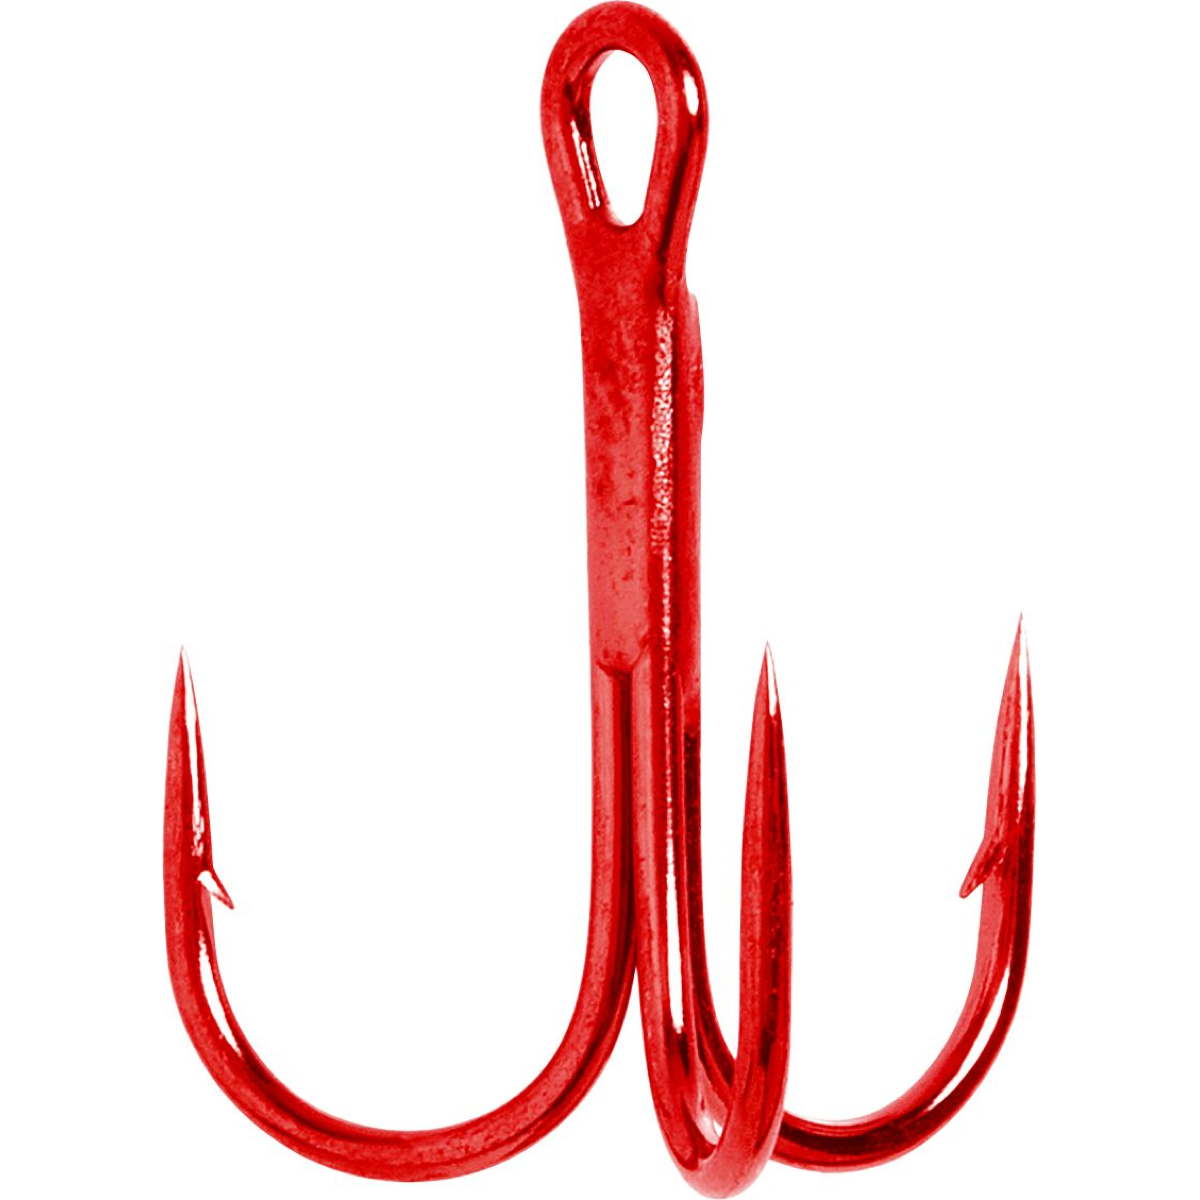 Photo of Eagle Claw Lazer Sharp Treble Hook for sale at United Tackle Shops.